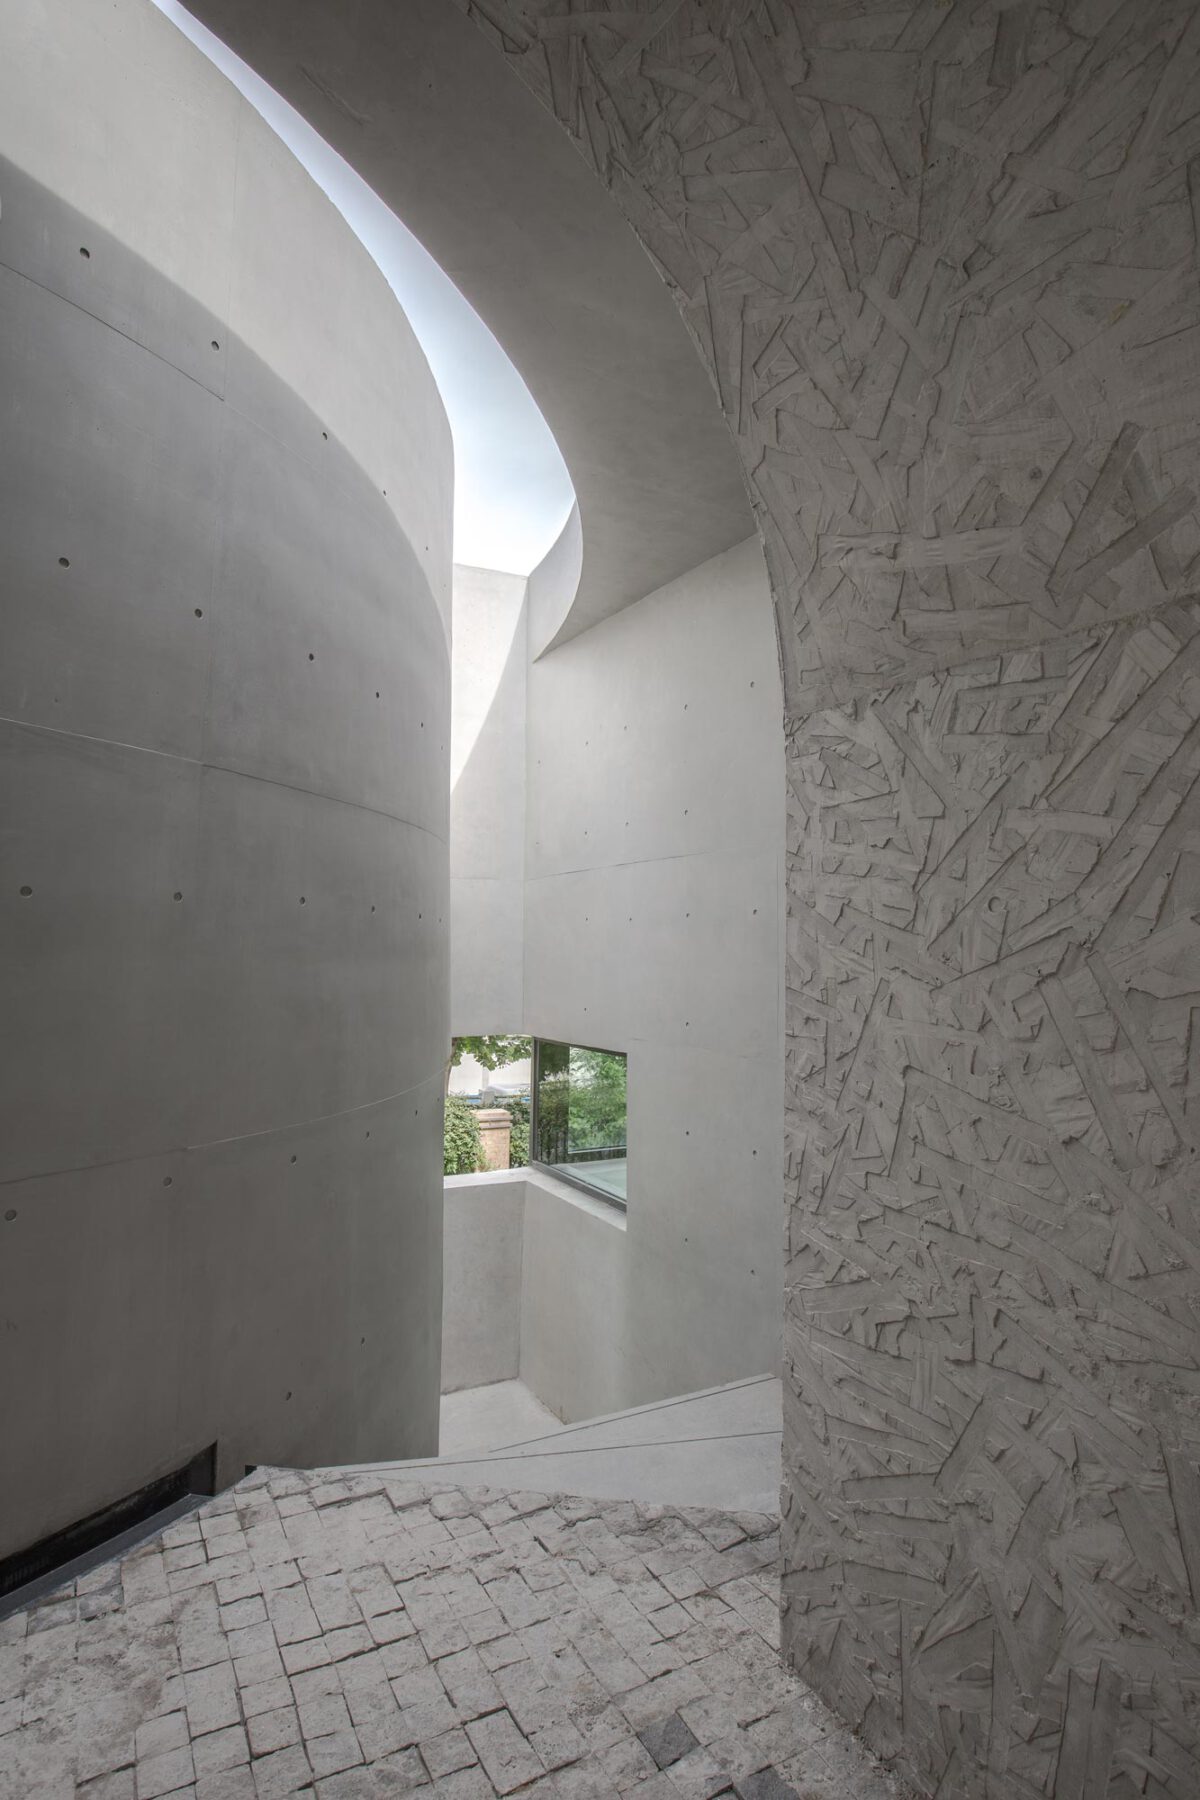 Archisearch Art Gallery Extension of Nanjing University of the Arts in China | by Atelier Diameter